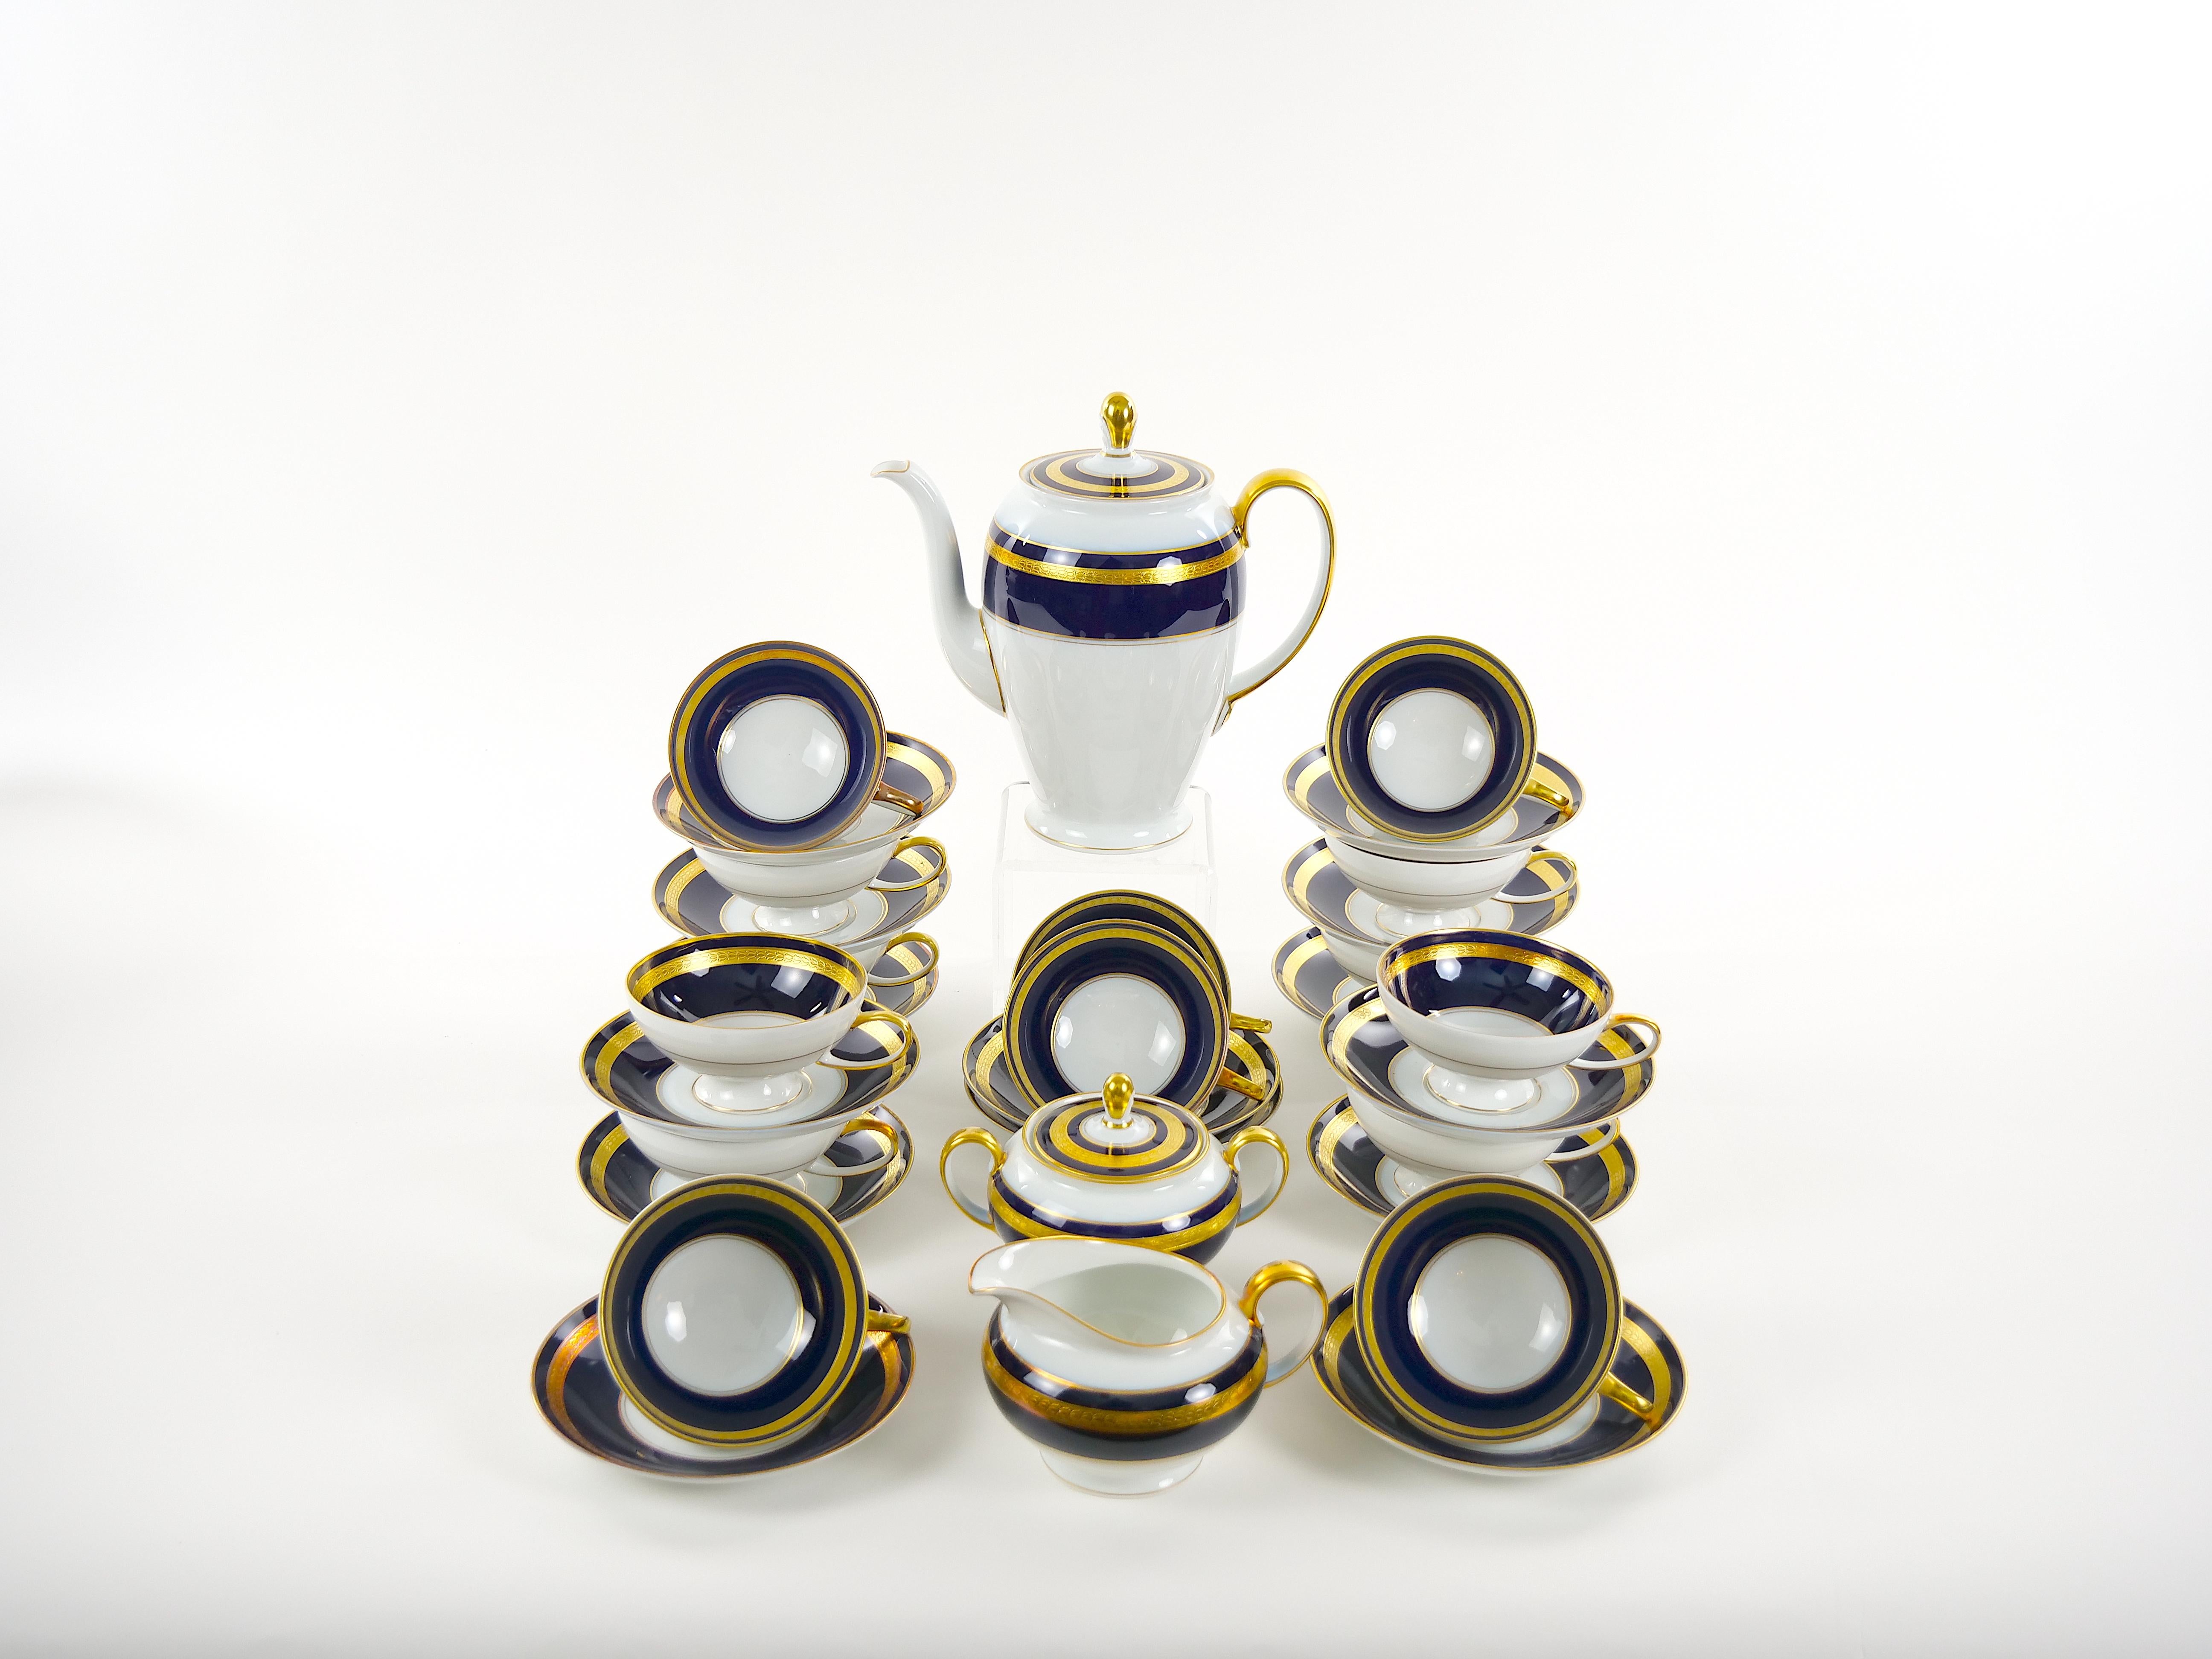 Beautiful  Rosenthal porcelain dinnerware in a cobalt blue with gilt gold design detail in a white background dinner service for fourteen people with serving pieces. Each piece is in excellent condition. Maker's mark undersigned. The set was never